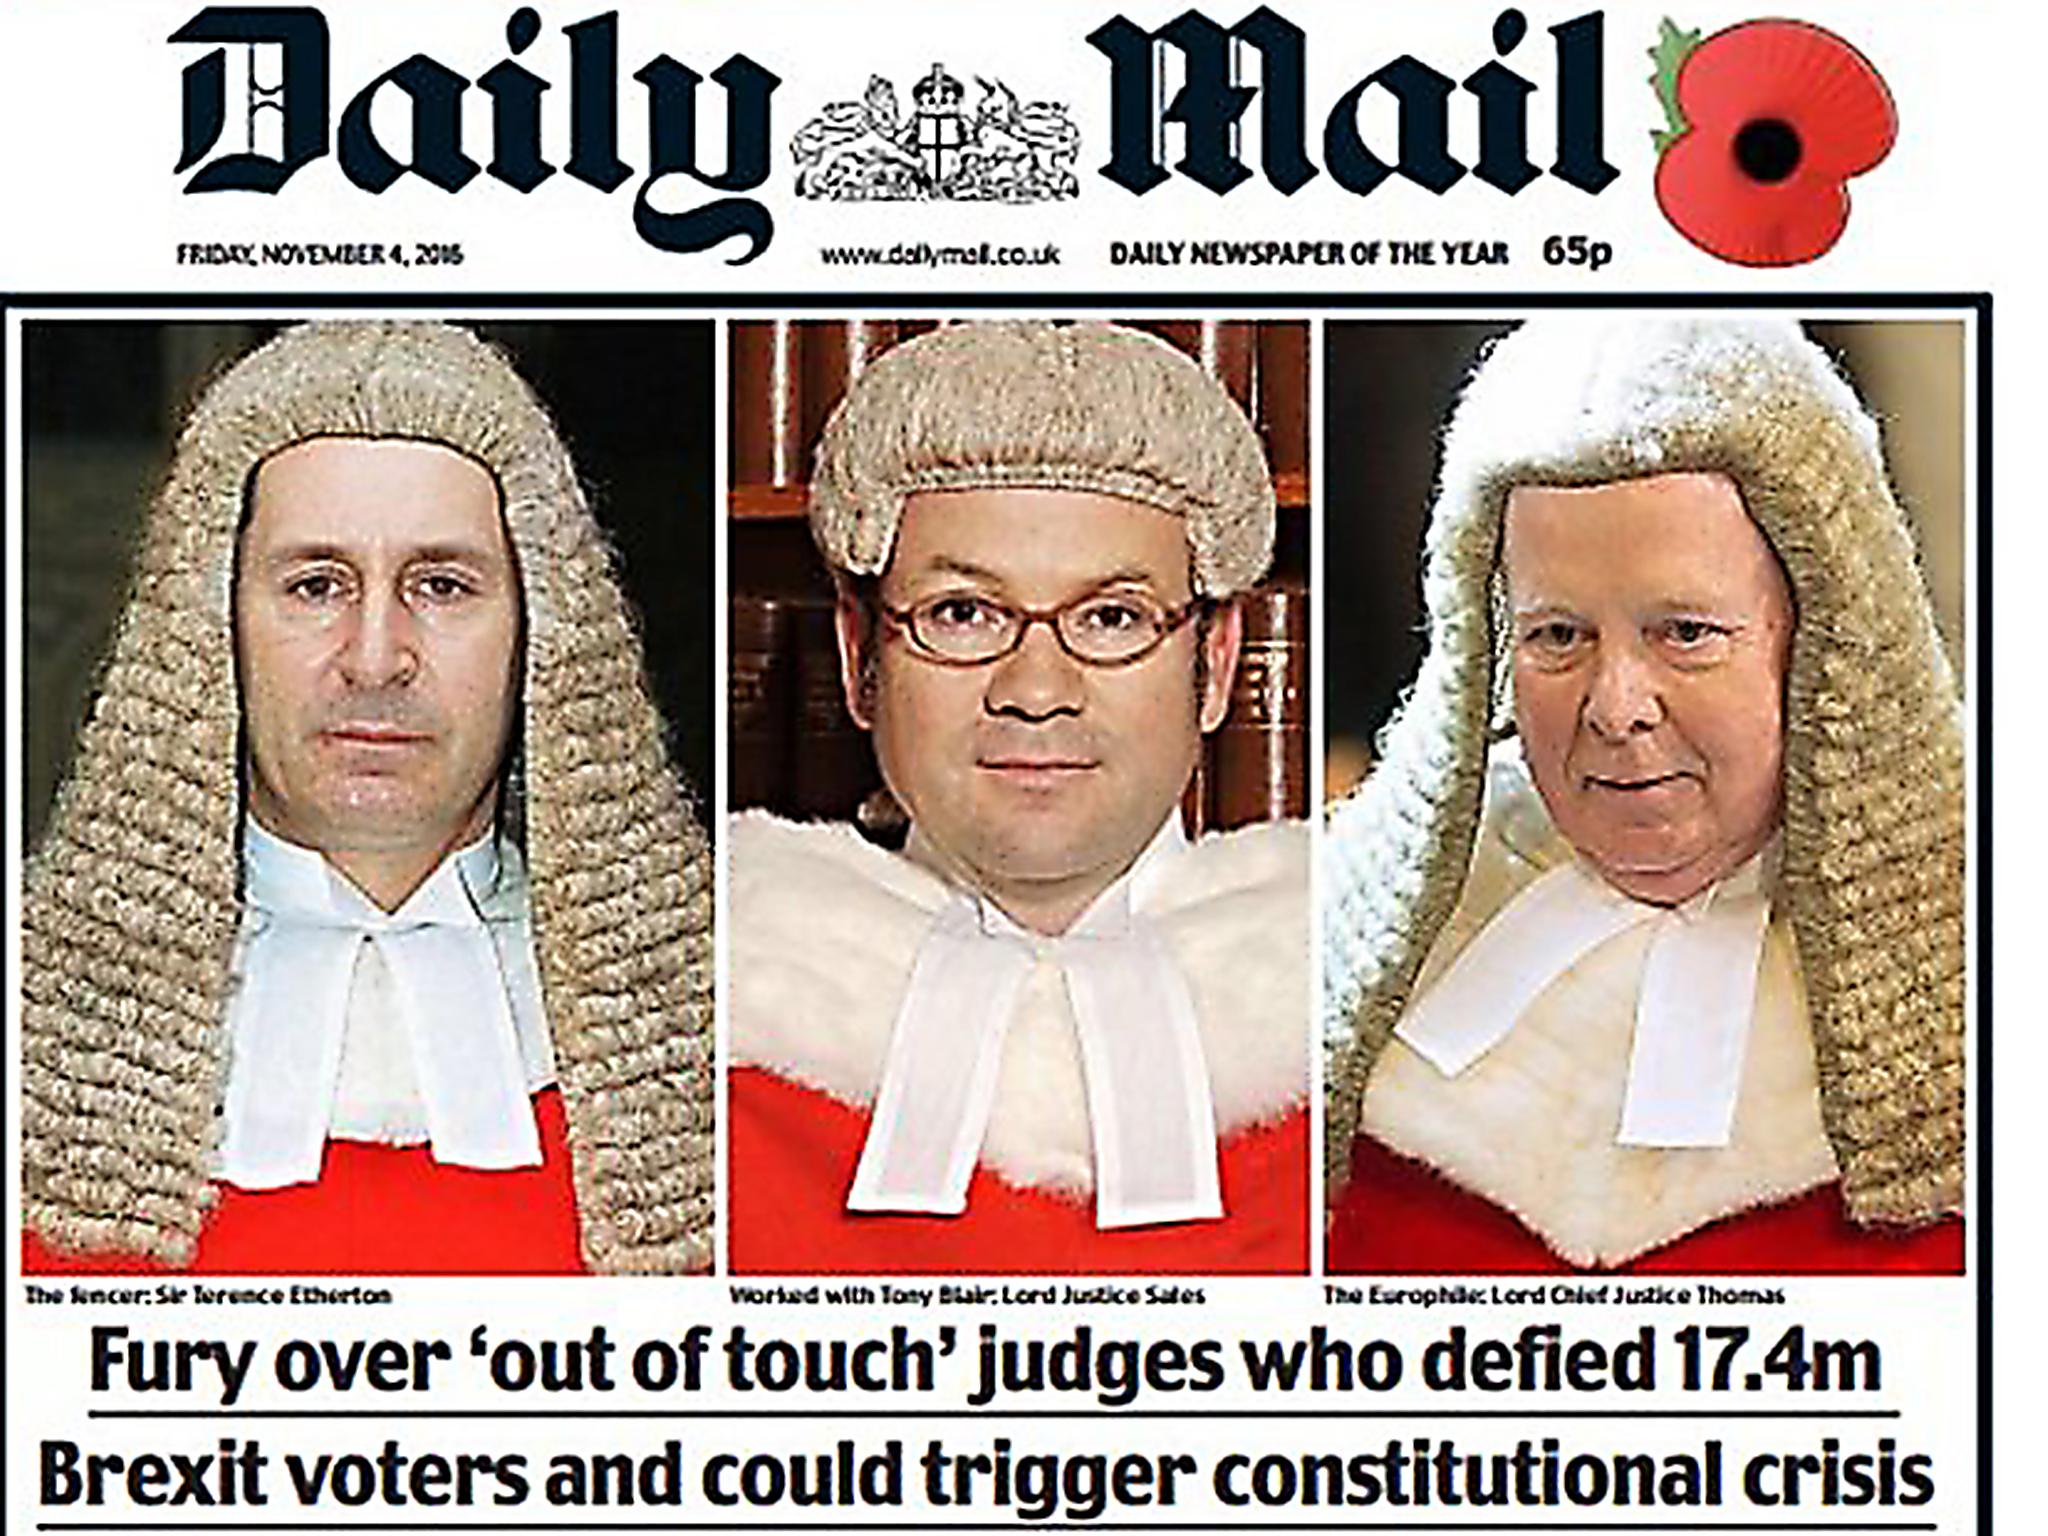 The Daily Mail front page prompted widespread outrage